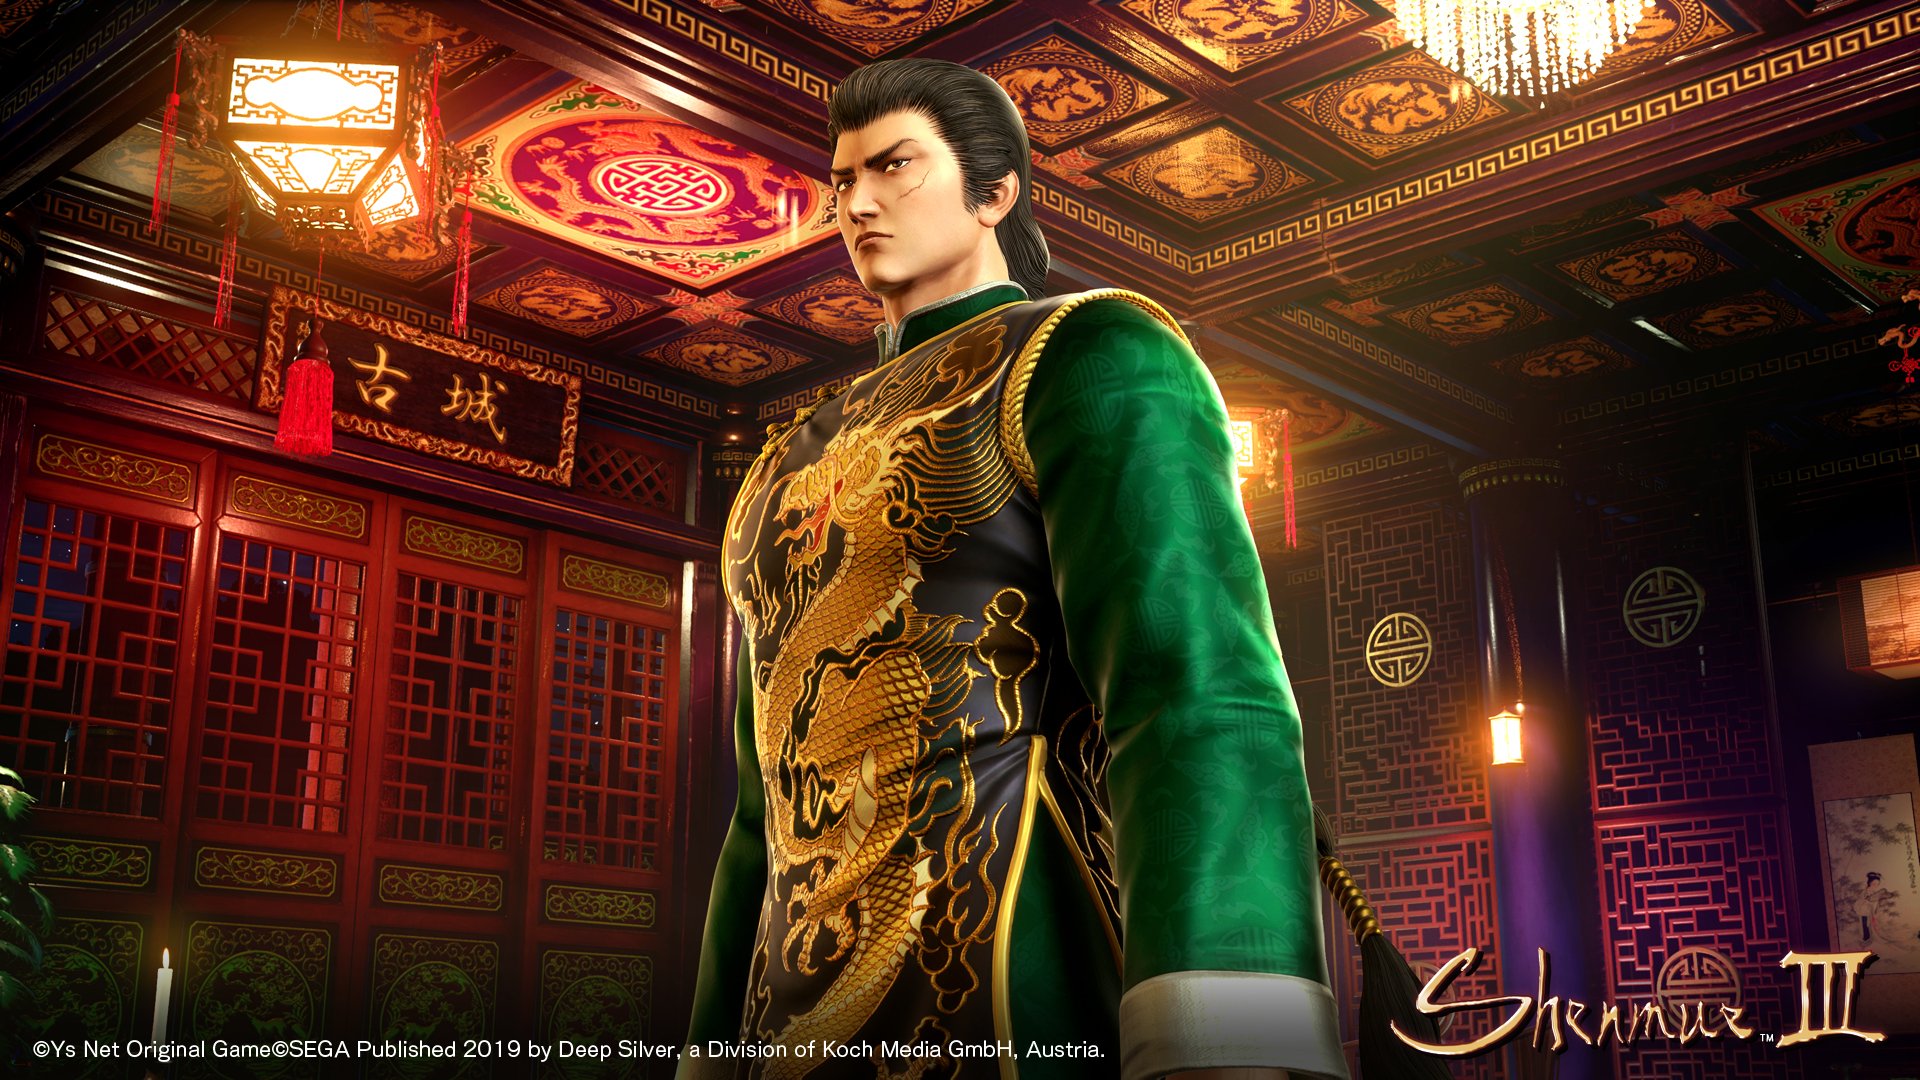 Shenmue III, Shenmue 3, release date, gameplay, trailer, PlayStation 4, game, update, story, new screenshot